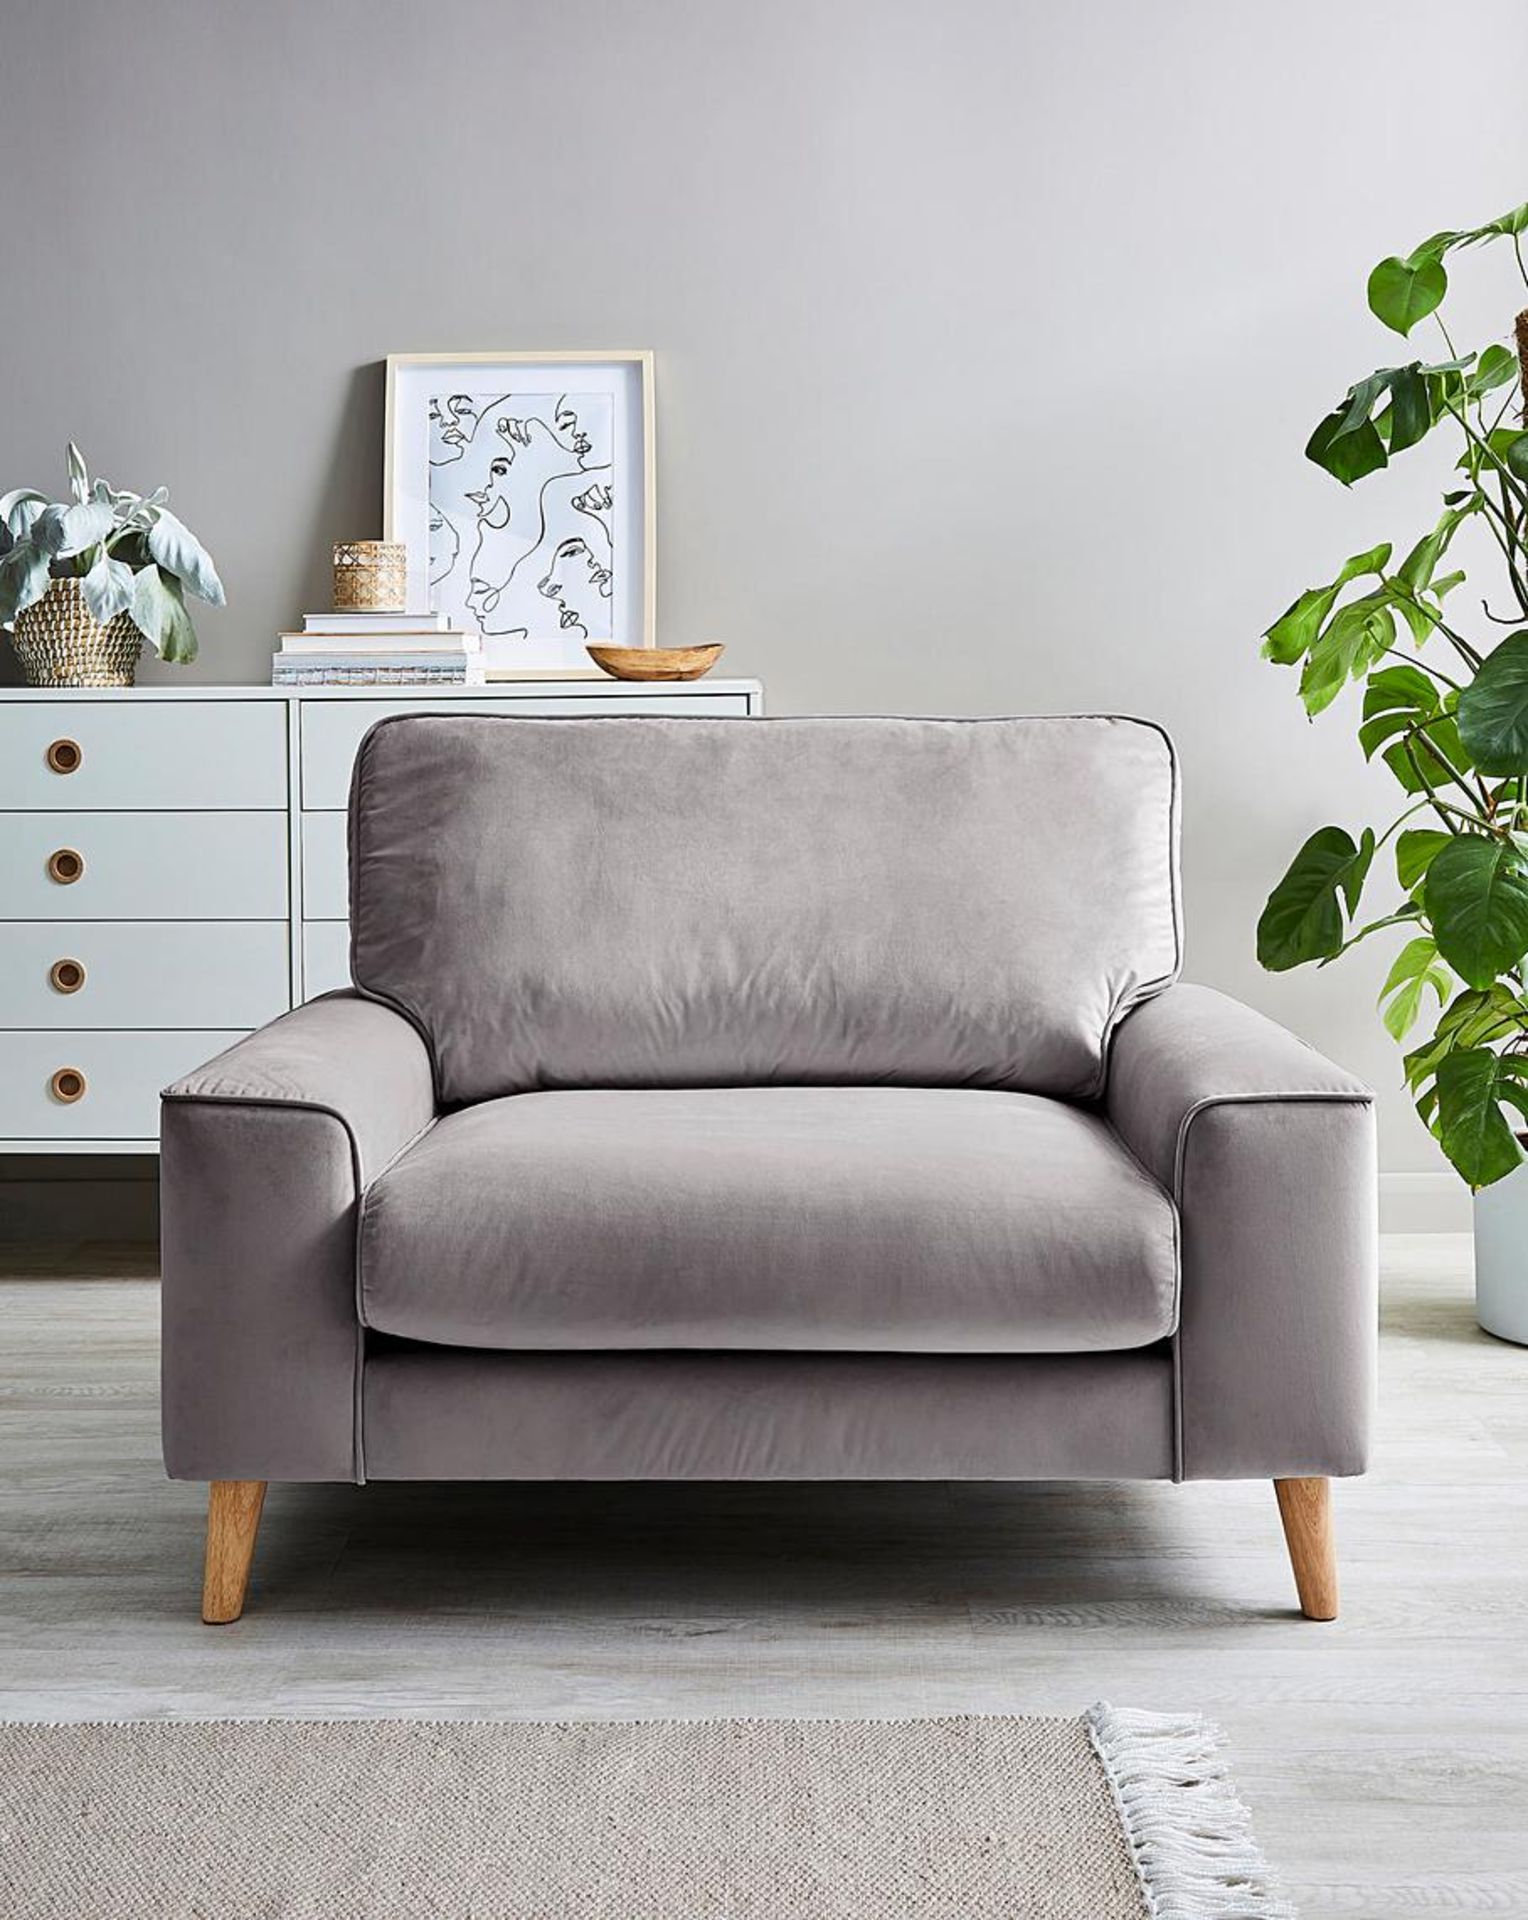 (P) RRP £479. Mallow Loveseat Grey. Discover The Perfect Spot To Curl Up On With The Lush Mallow Lo